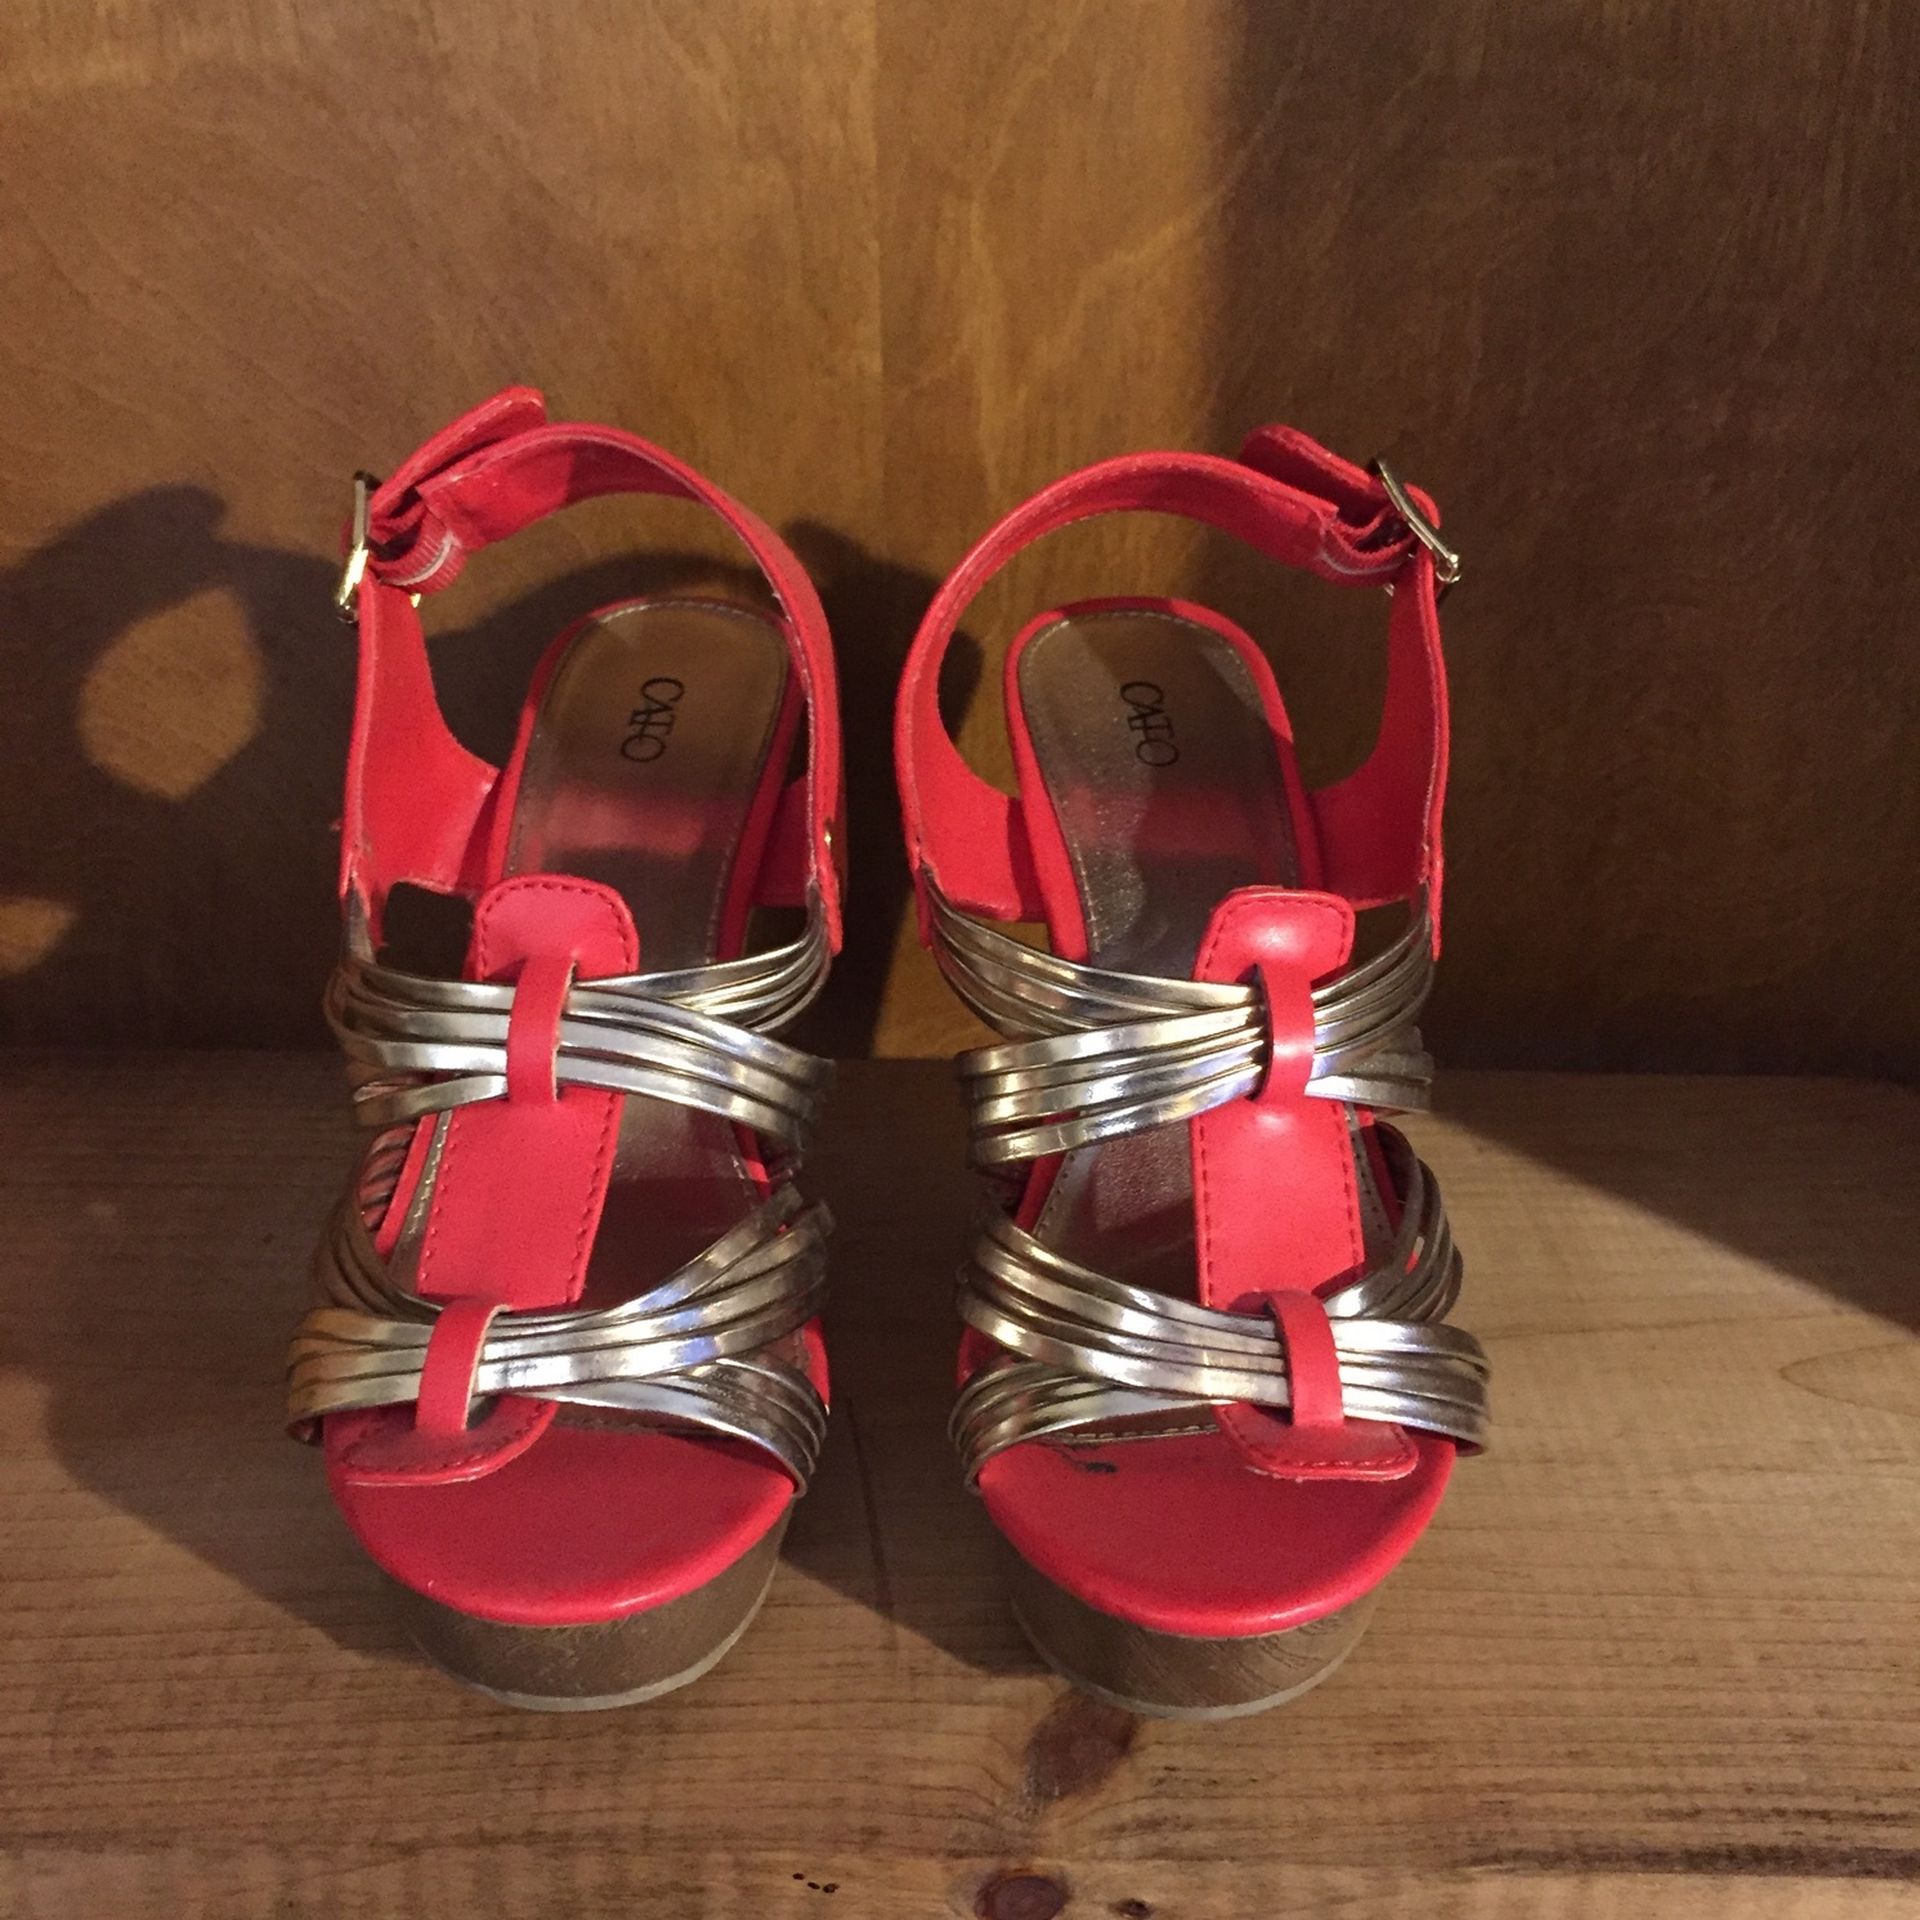 Adorable Cato Wedge Sandals - 7